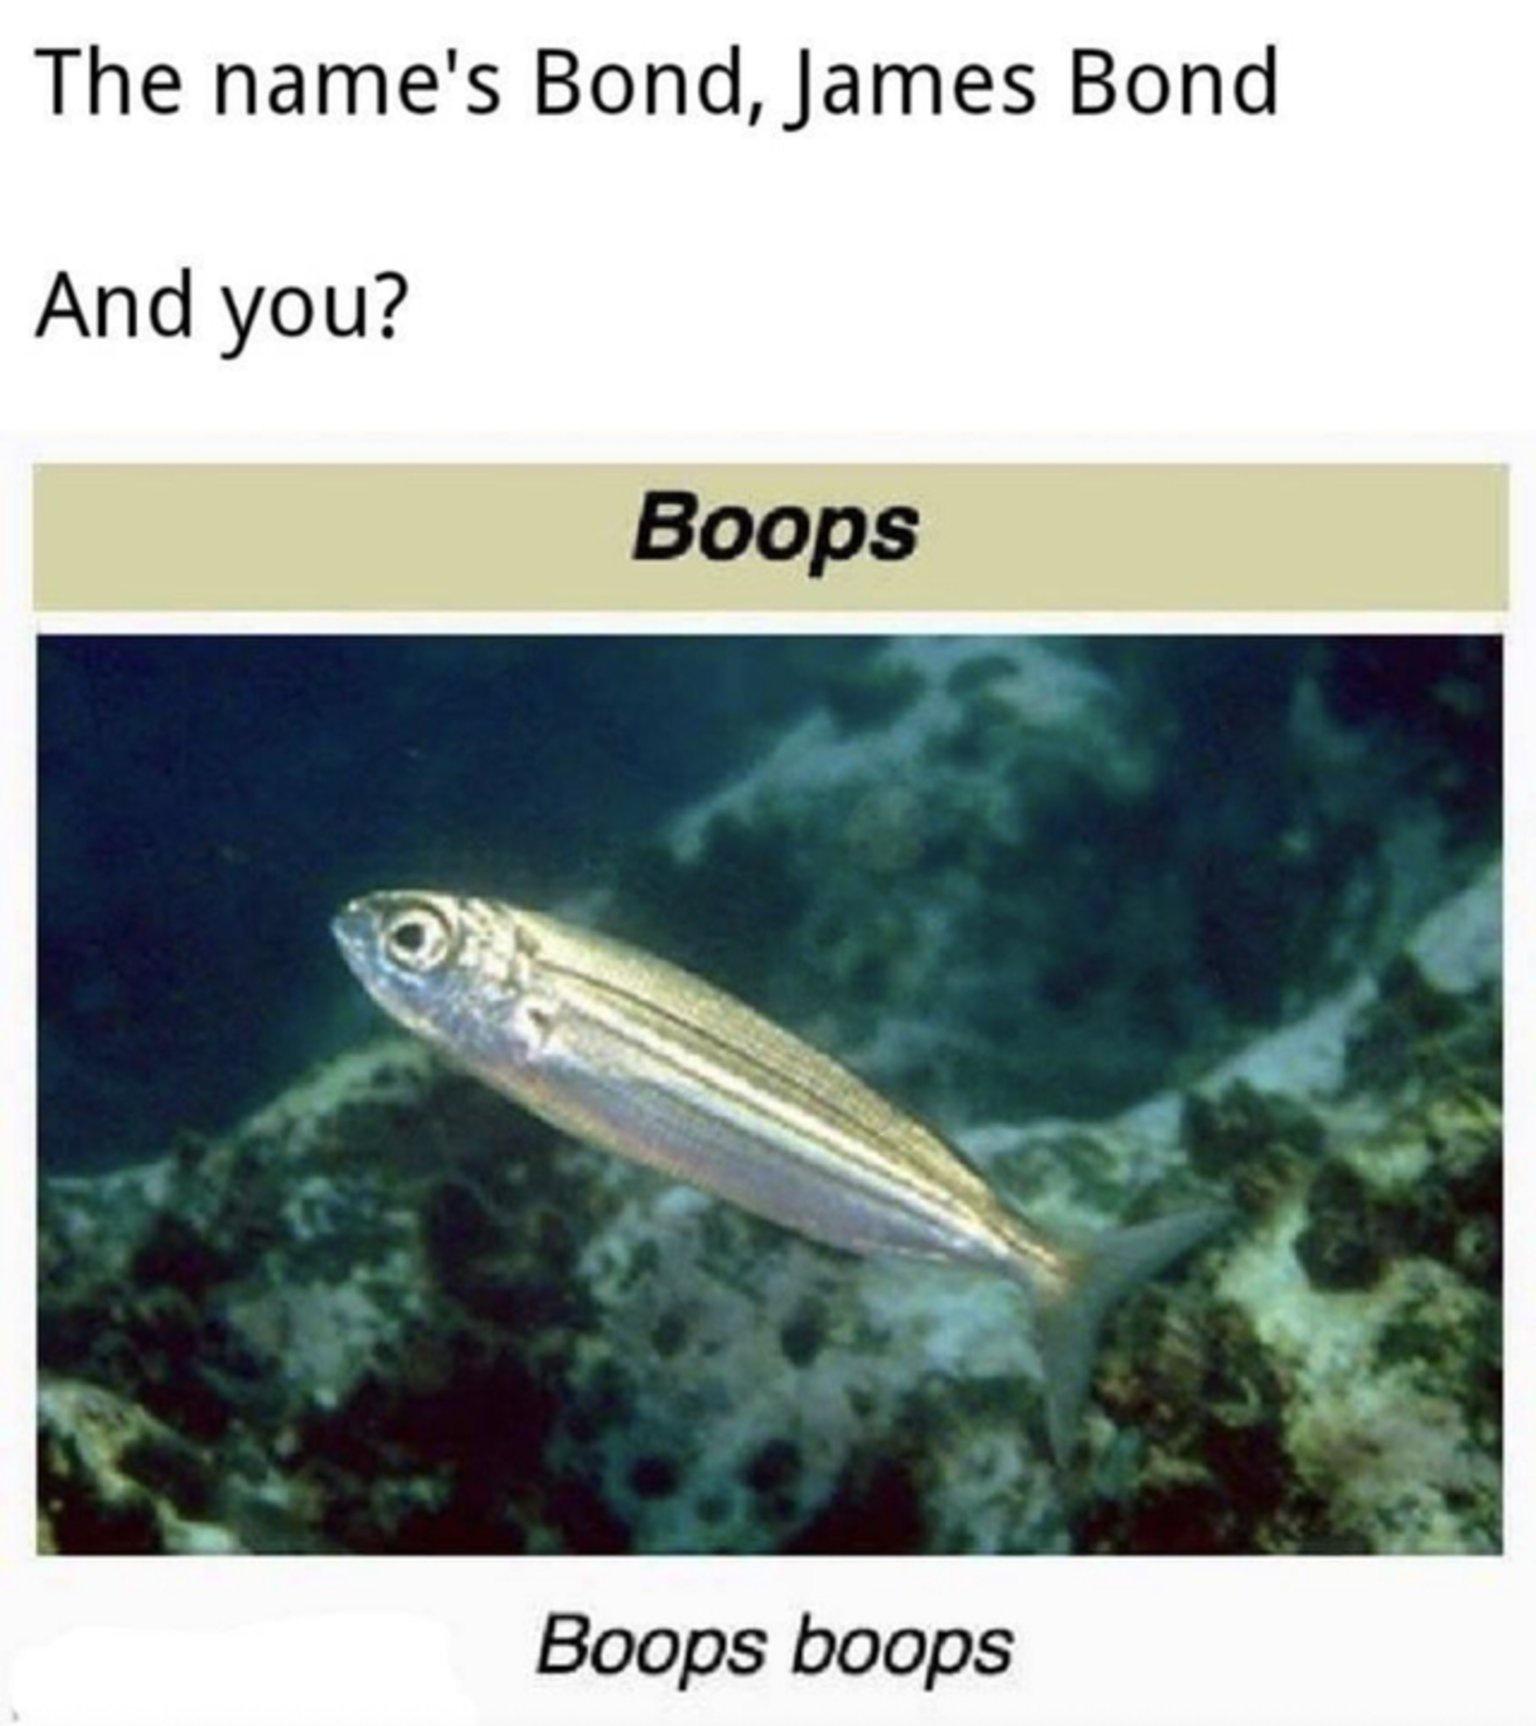 names boops boops boops - The name's Bond, James Bond And you? Boops Boops boops